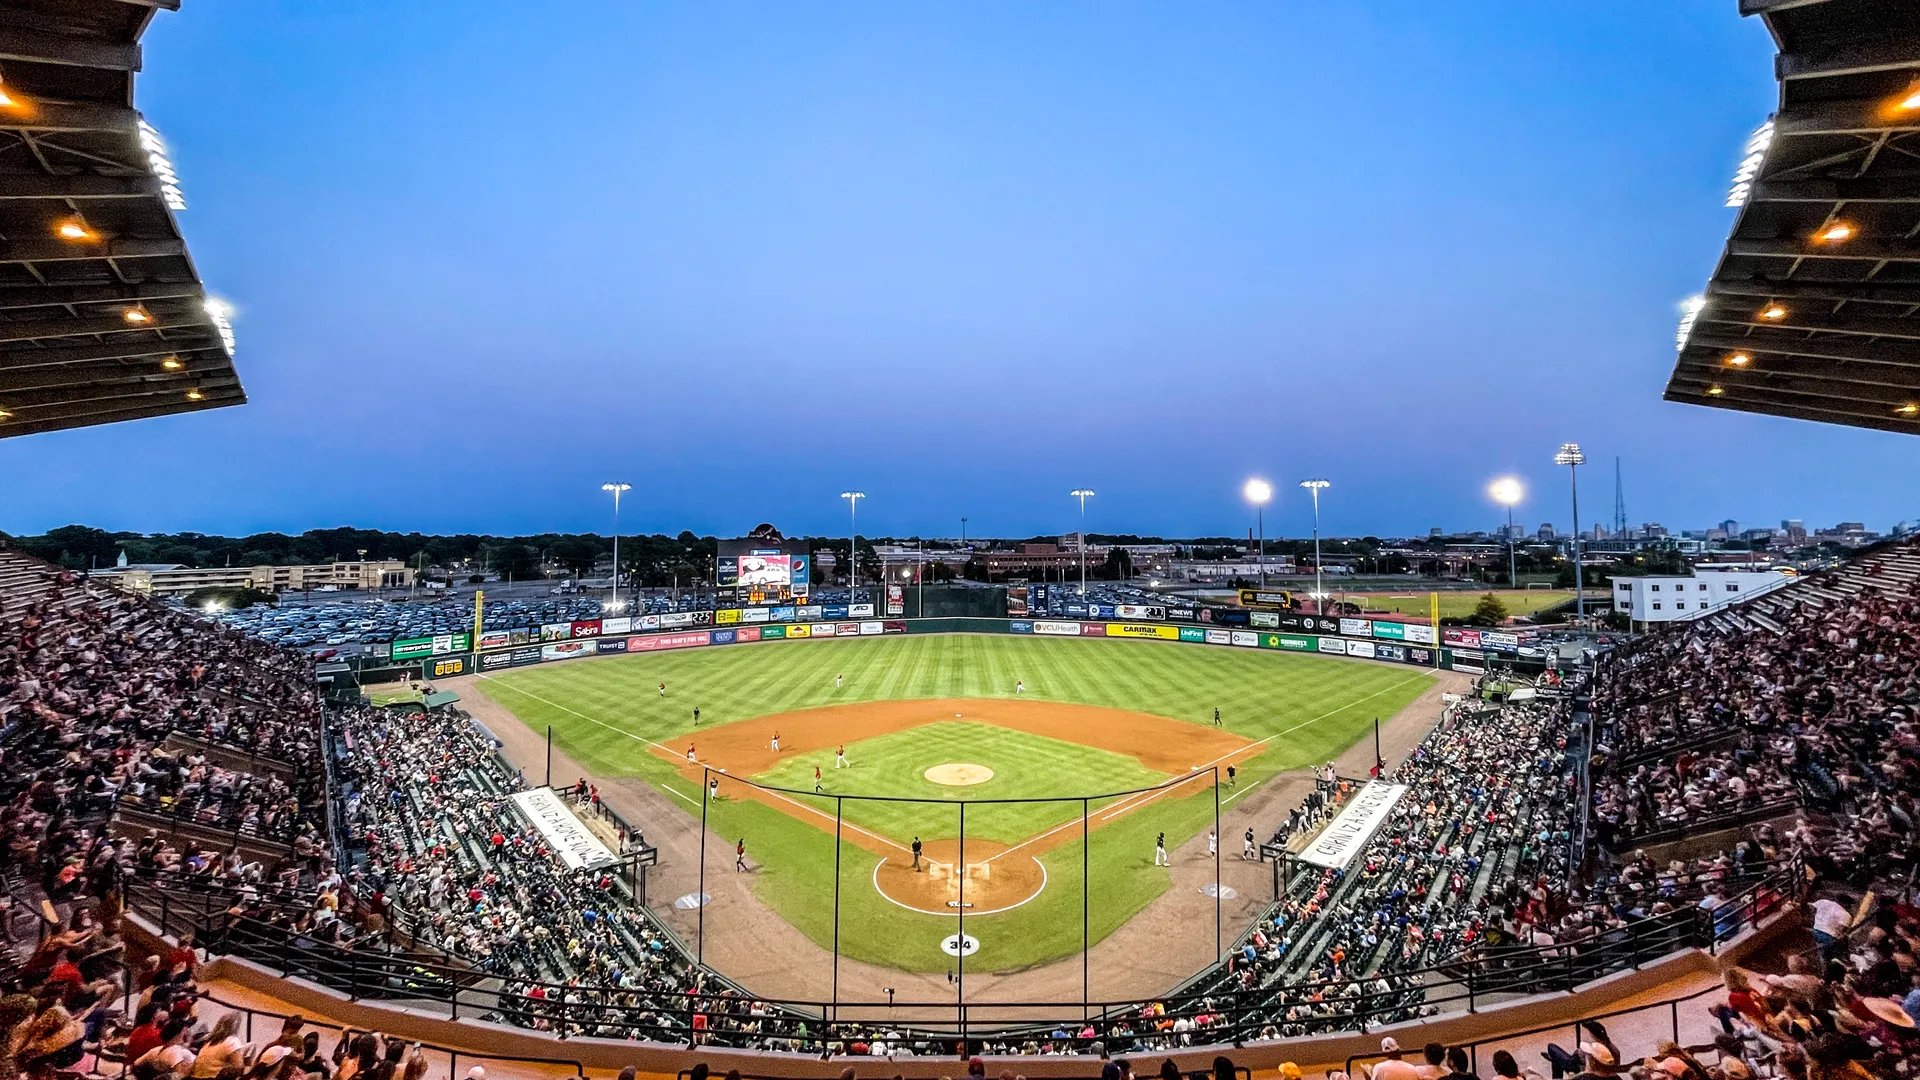 Picture of the Flying Squirrels stadium located in Richmond, Virginia